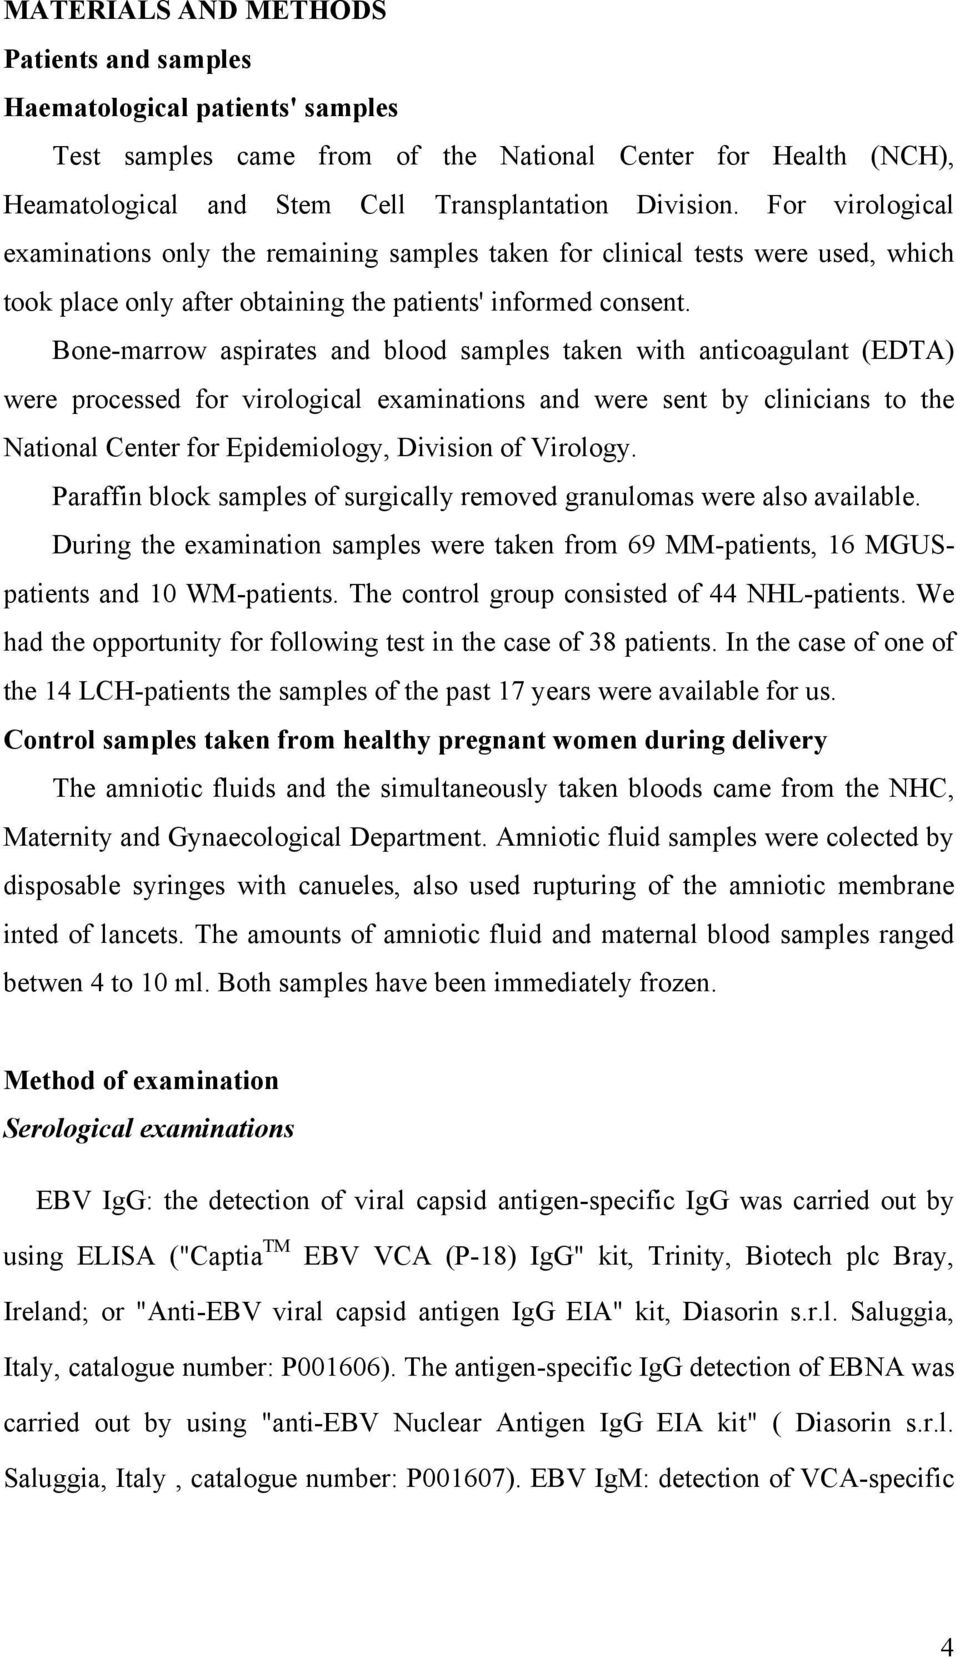 Bone-marrow aspirates and blood samples taken with anticoagulant (EDTA) were processed for virological examinations and were sent by clinicians to the National Center for Epidemiology, Division of